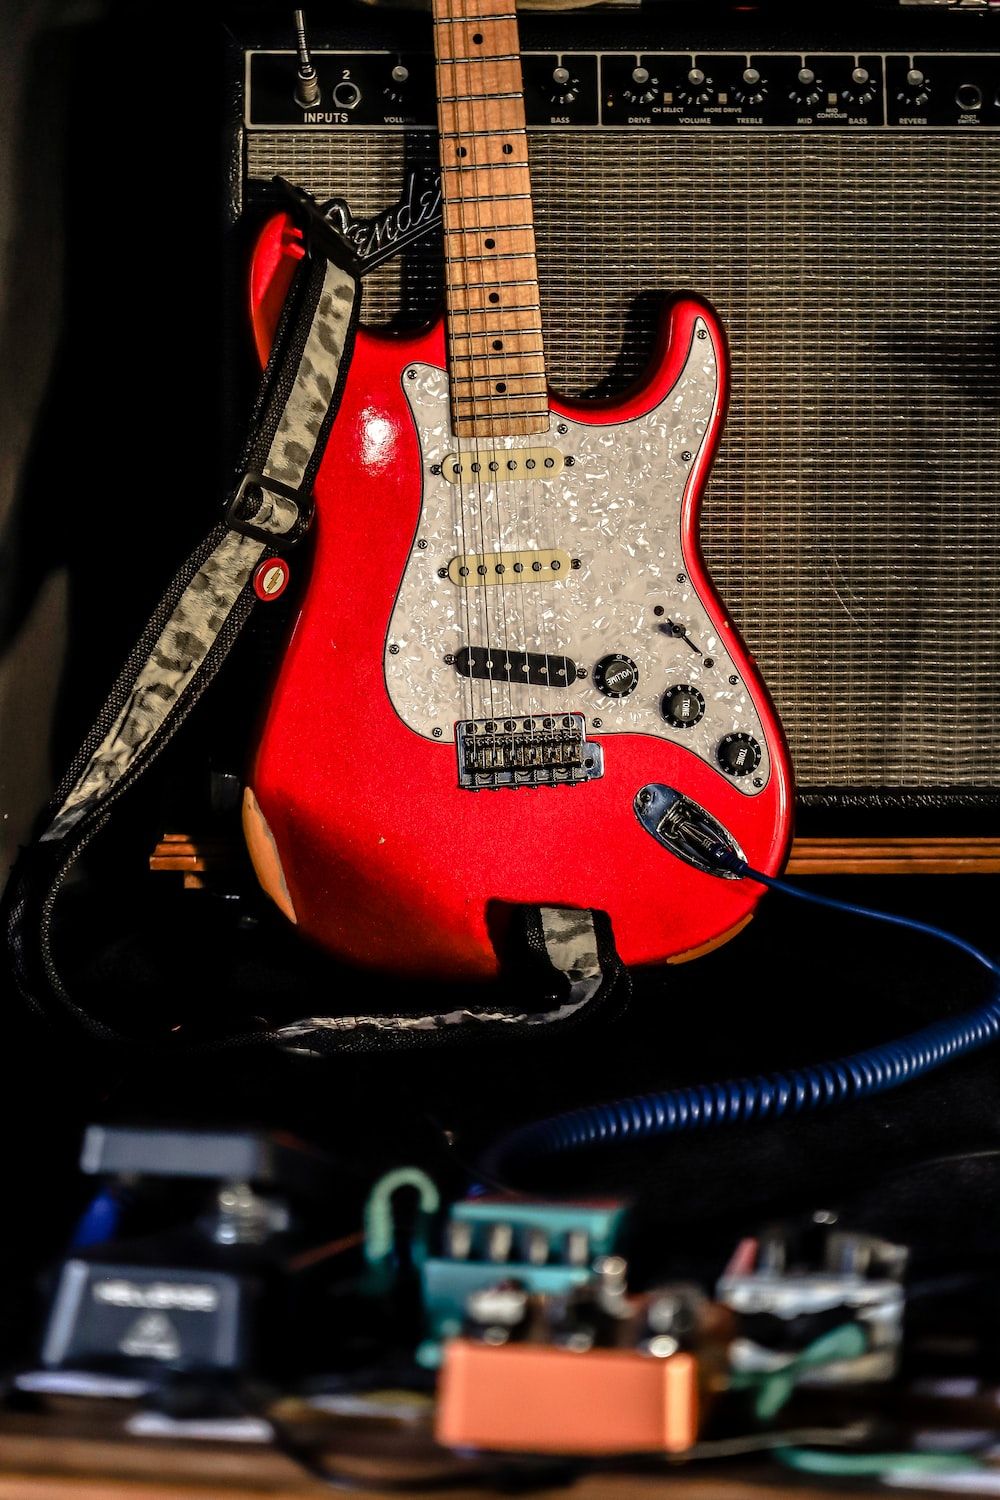 Red Guitar Picture. Download Free Image